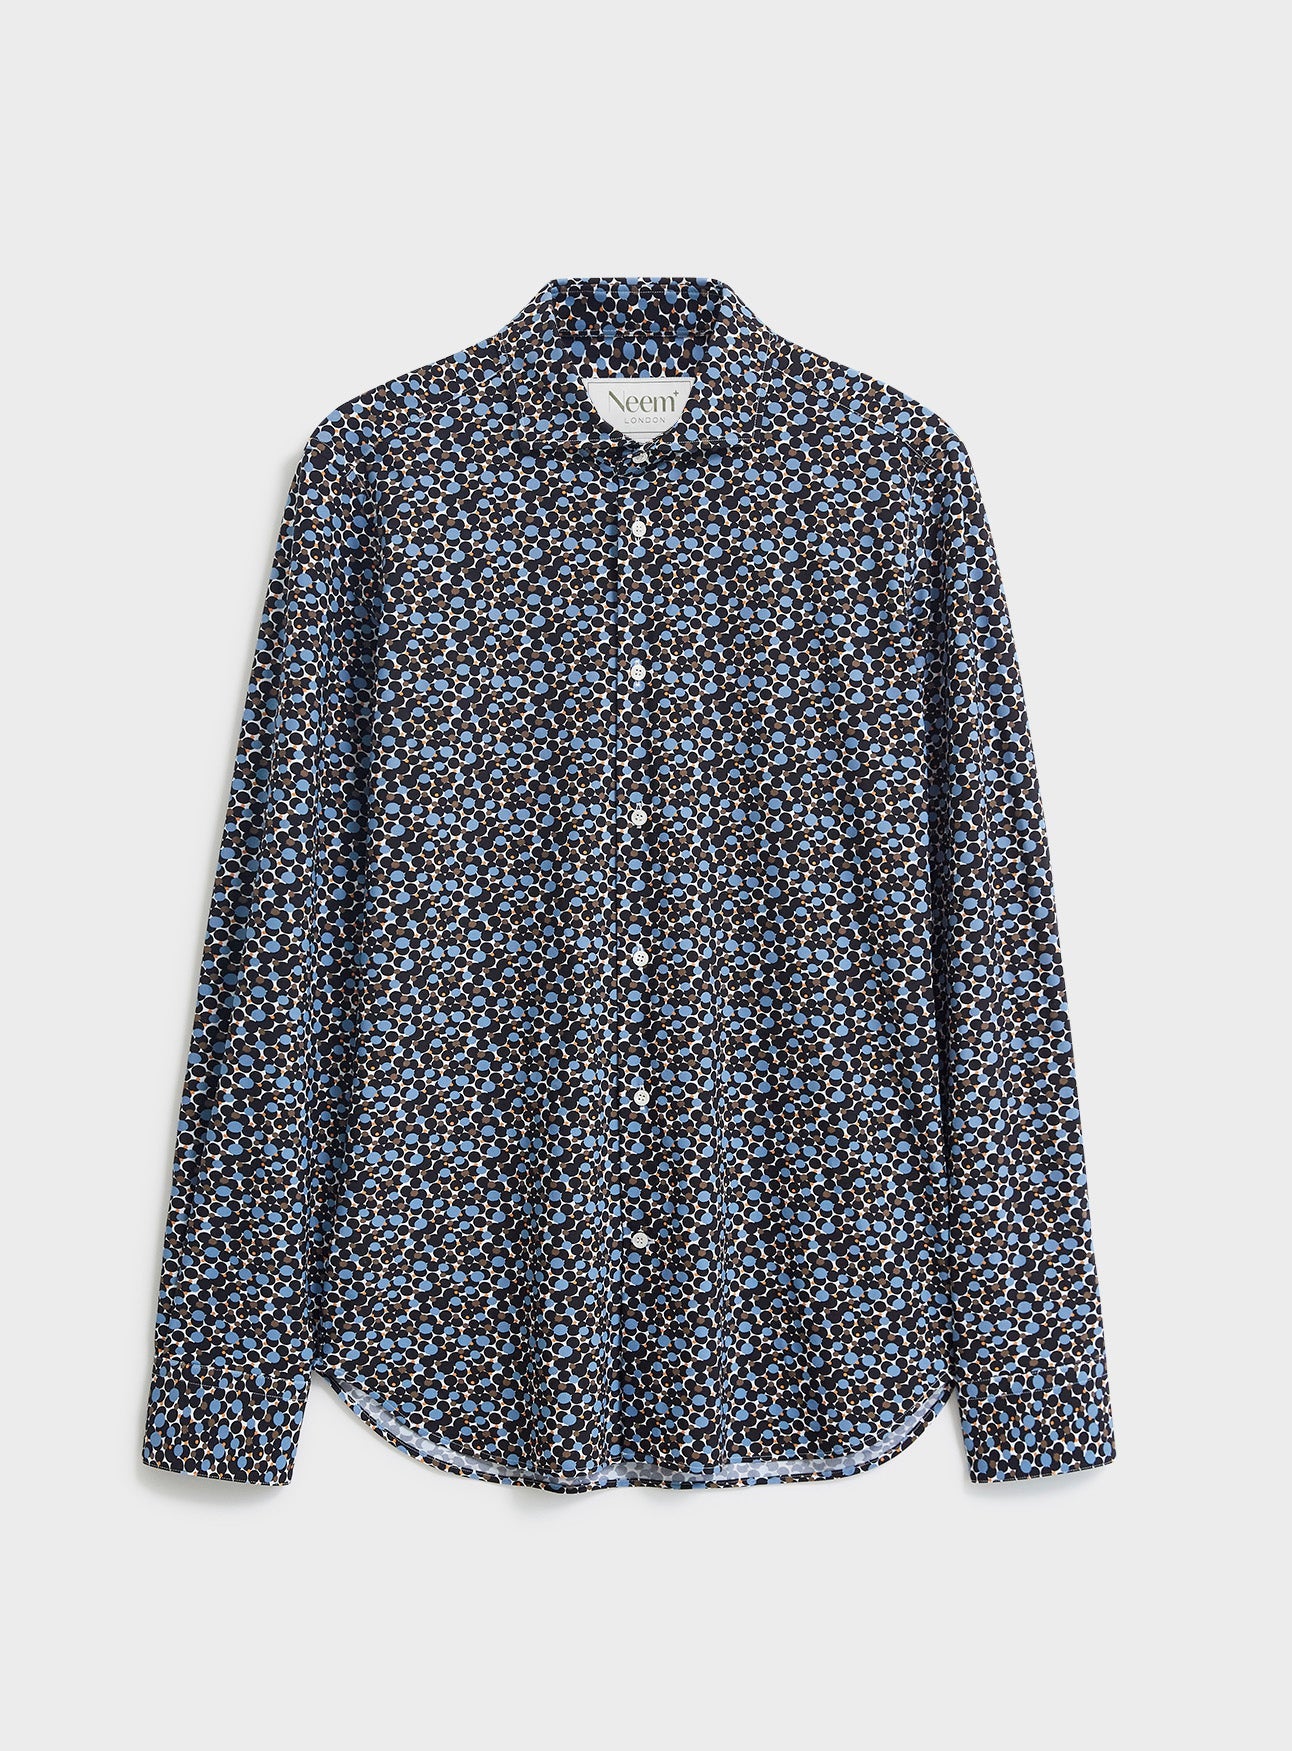 sustainable clothing, essentials shirt